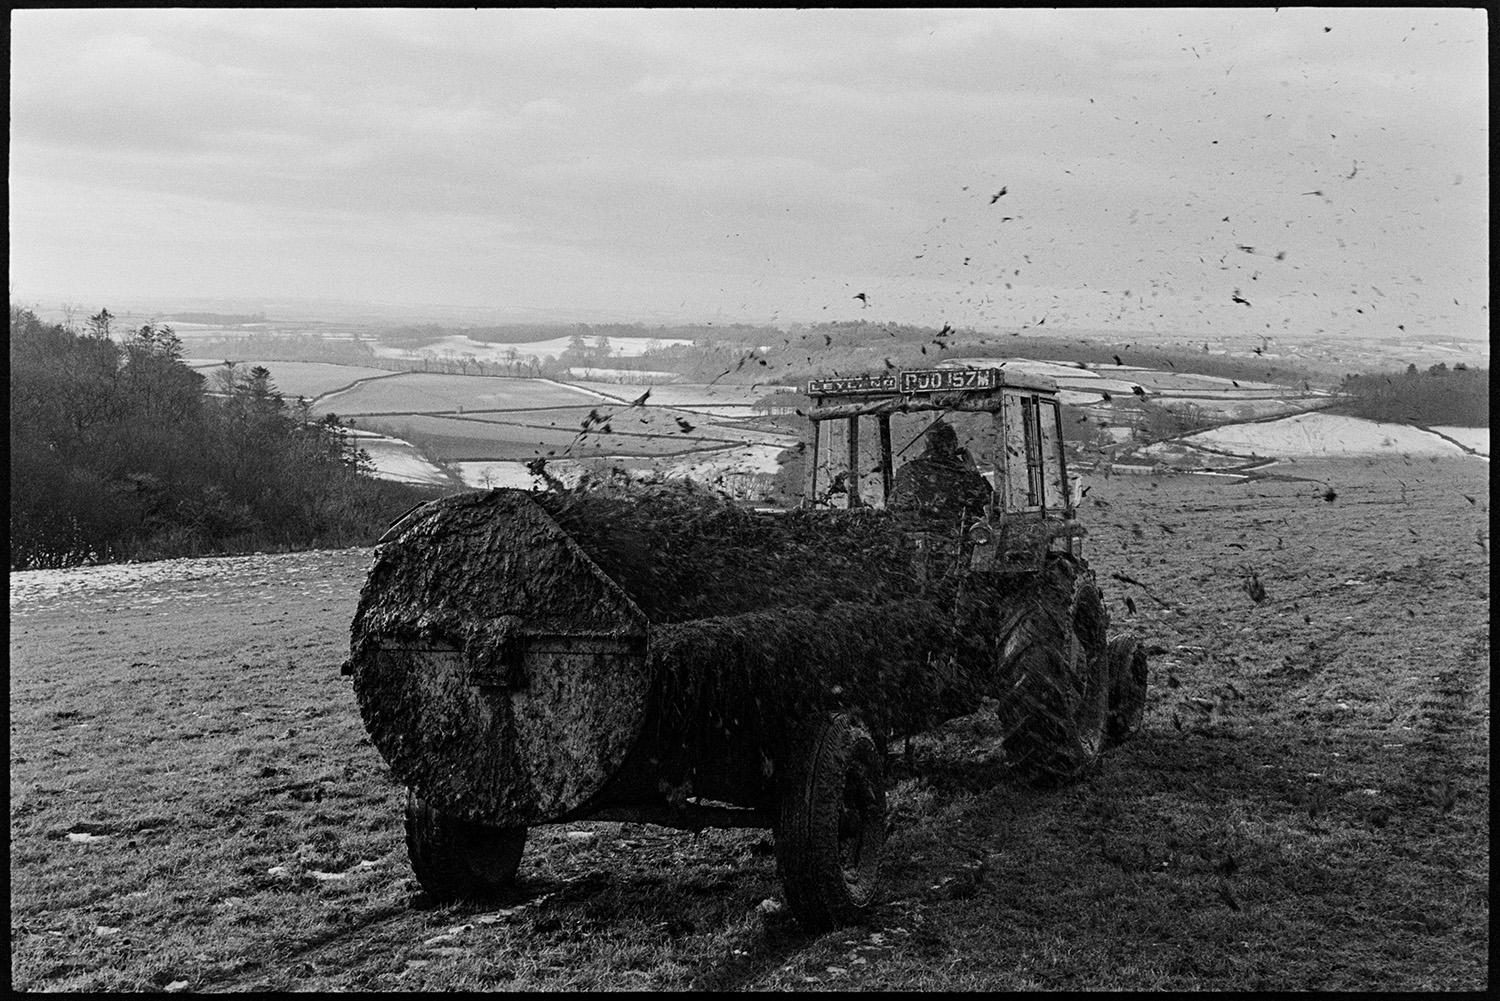 Snowy landscape with cows and farmer muckspreading. 
[A person muckspreading with a tractor and muck spreader in a field at Harepath, Beaford. A landscape with snow covered fields is visible in the background.]